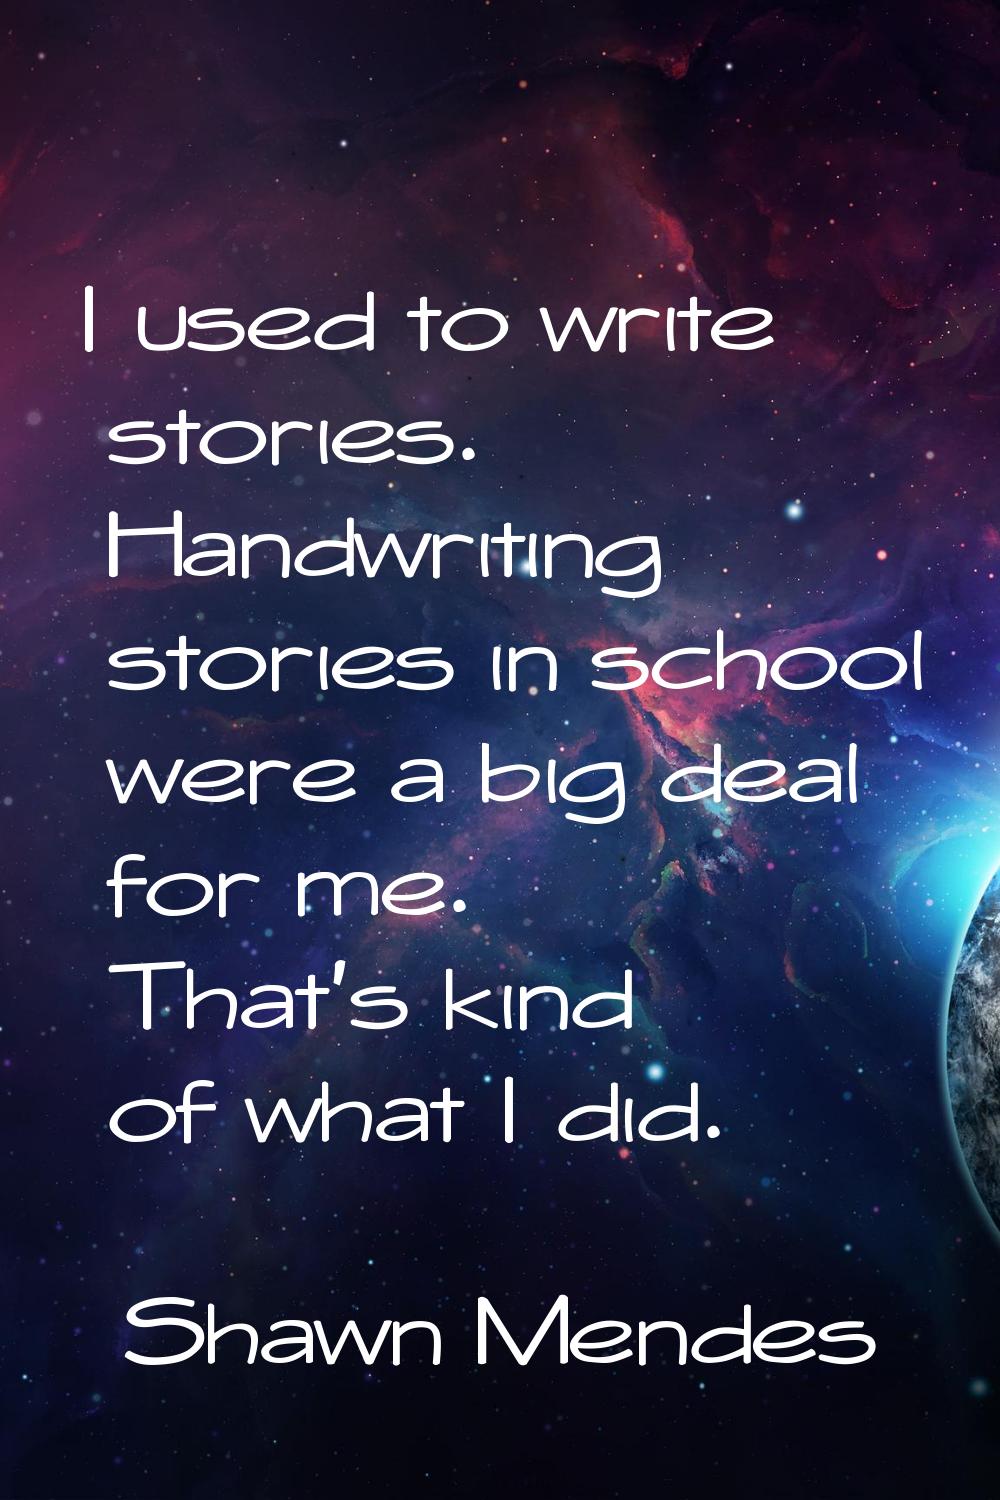 I used to write stories. Handwriting stories in school were a big deal for me. That's kind of what 